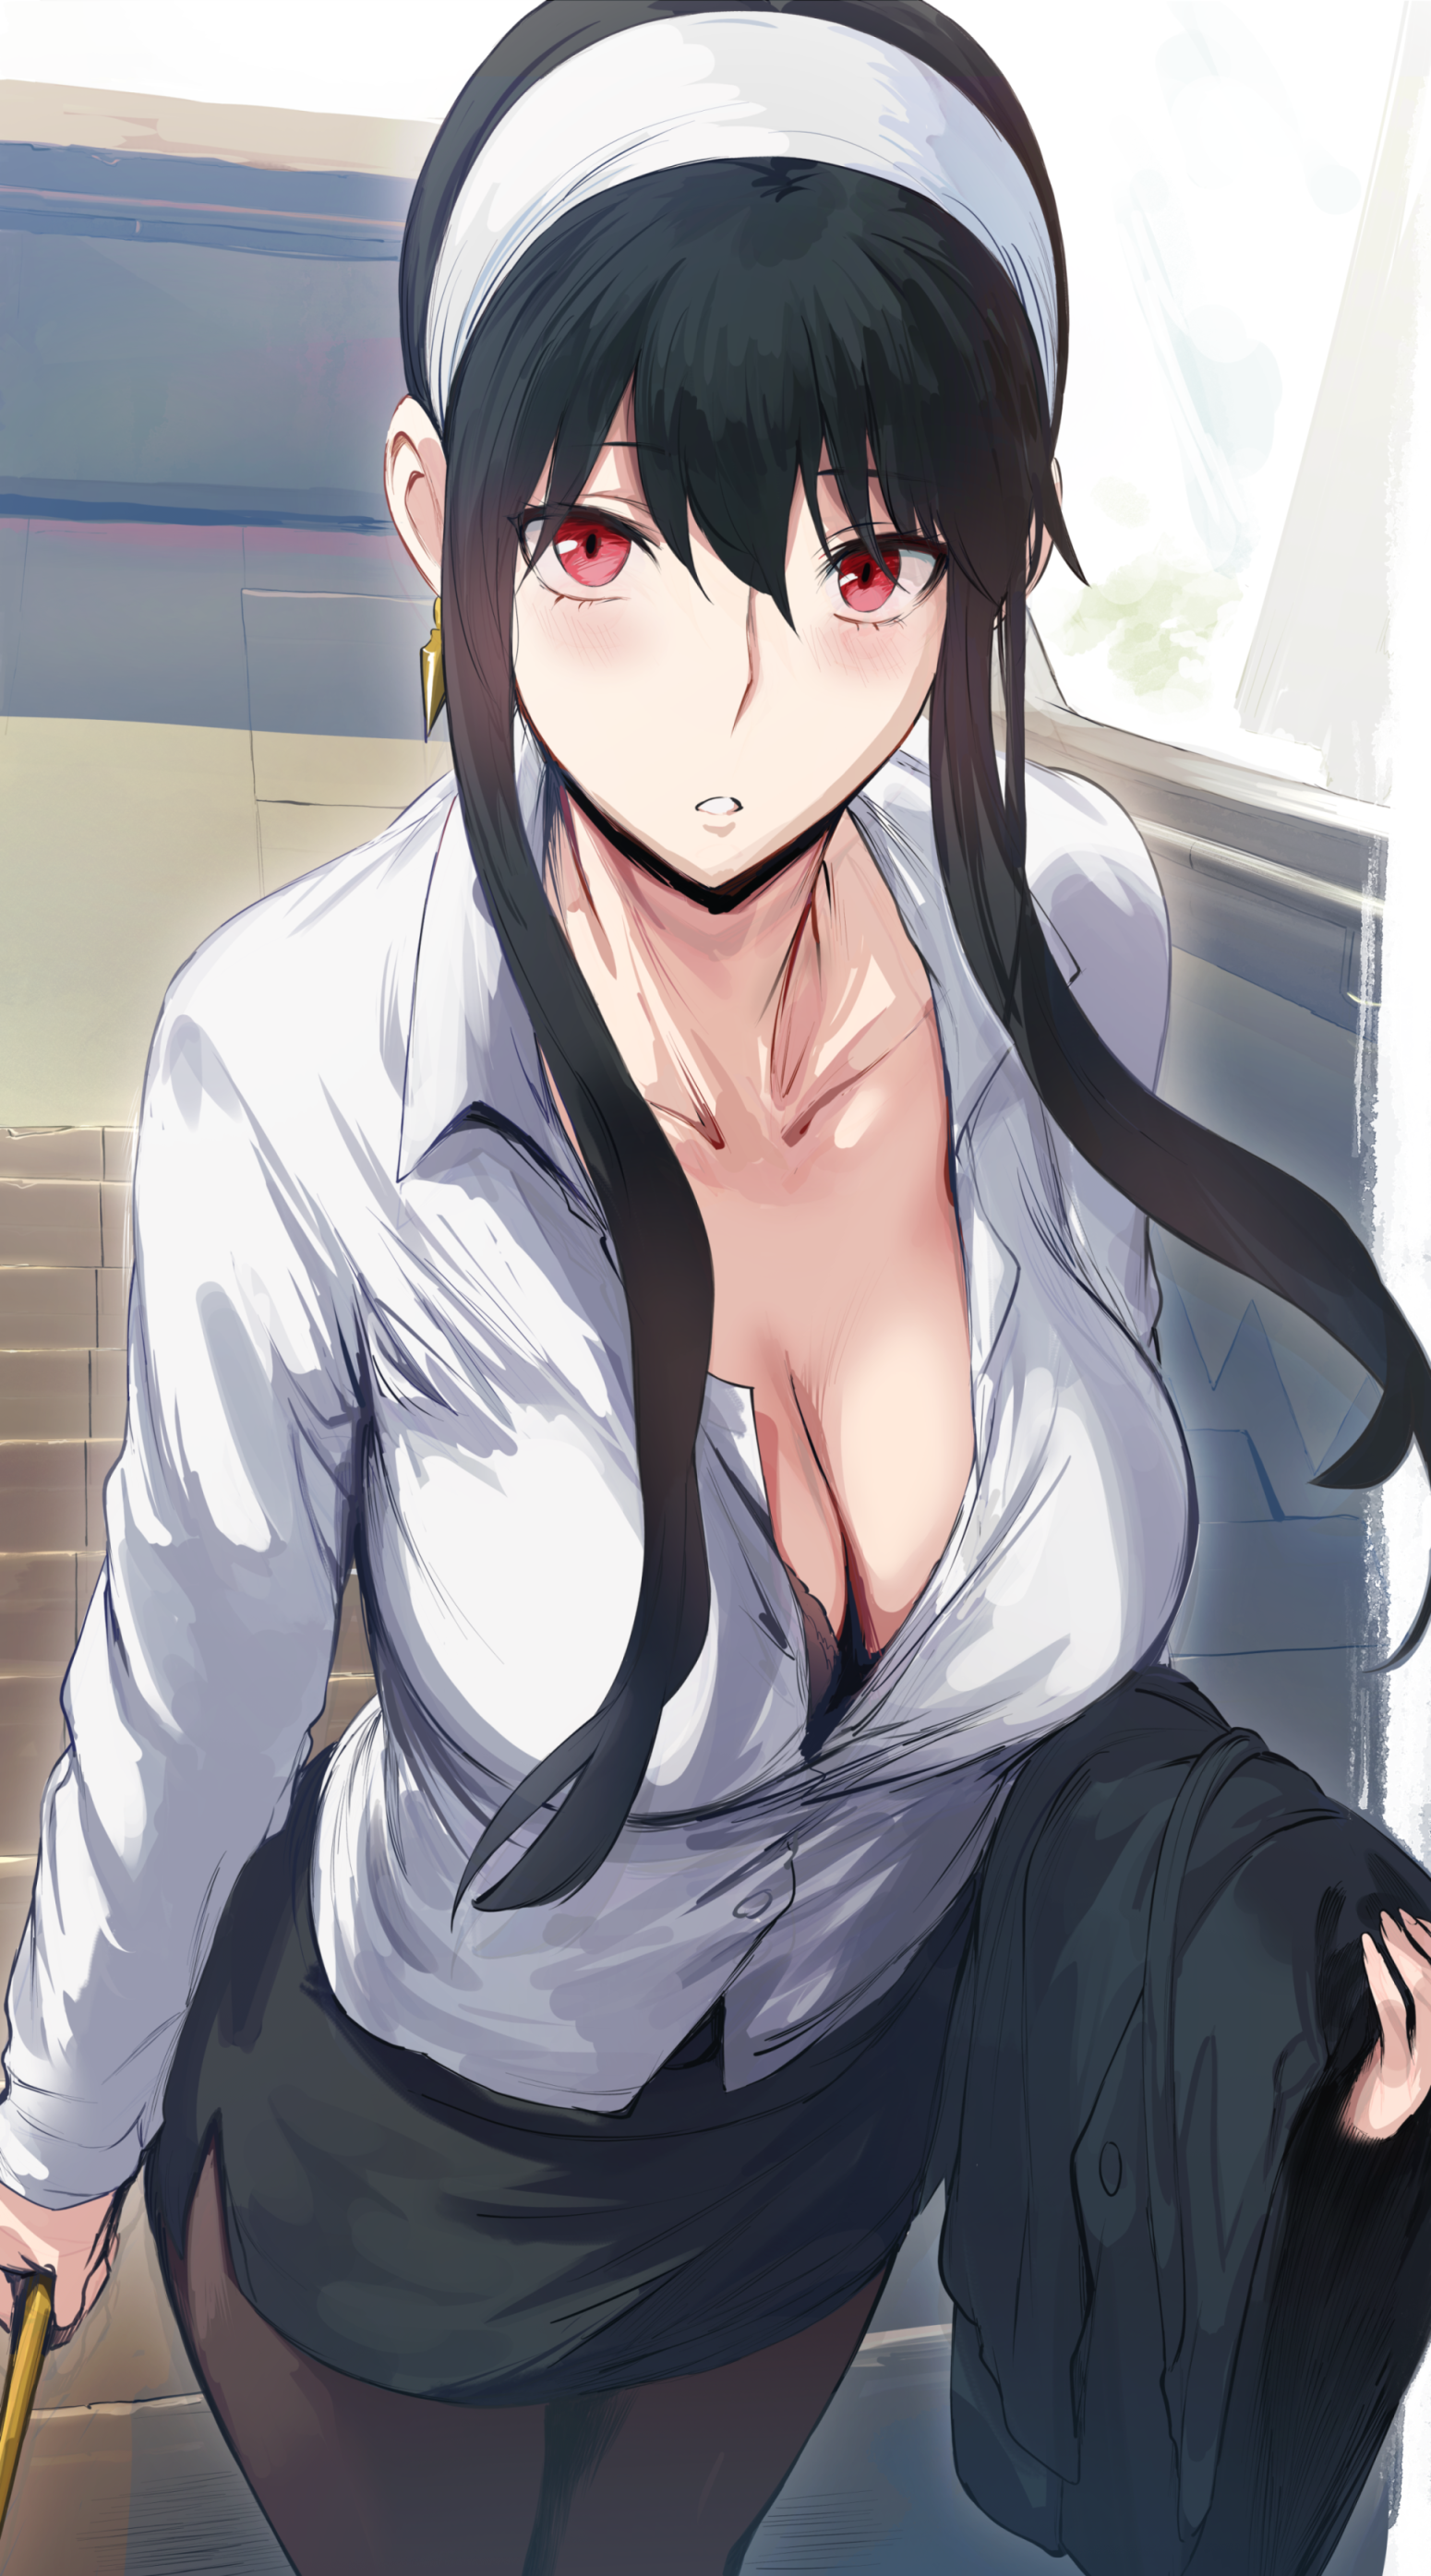 Anime 1550x2791 anime anime girls Yor Forger Spy x Family cleavage red eyes black hair boobs big boobs curvy skirt black skirts women looking at viewer earring face open clothes blouses Hews artwork